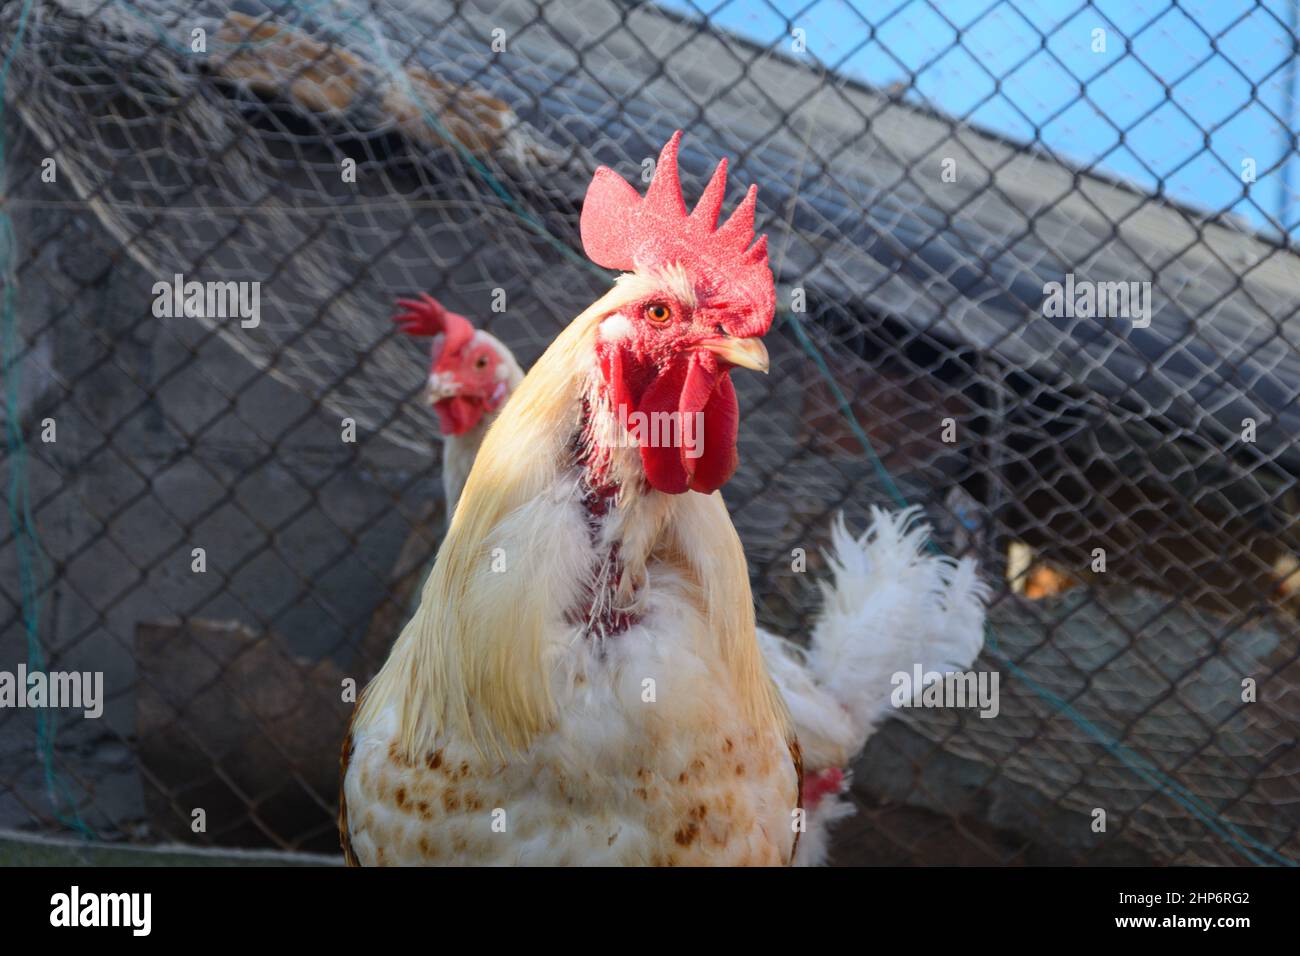 Large white rooster with red comb on its head looks into the camera. Stock Photo